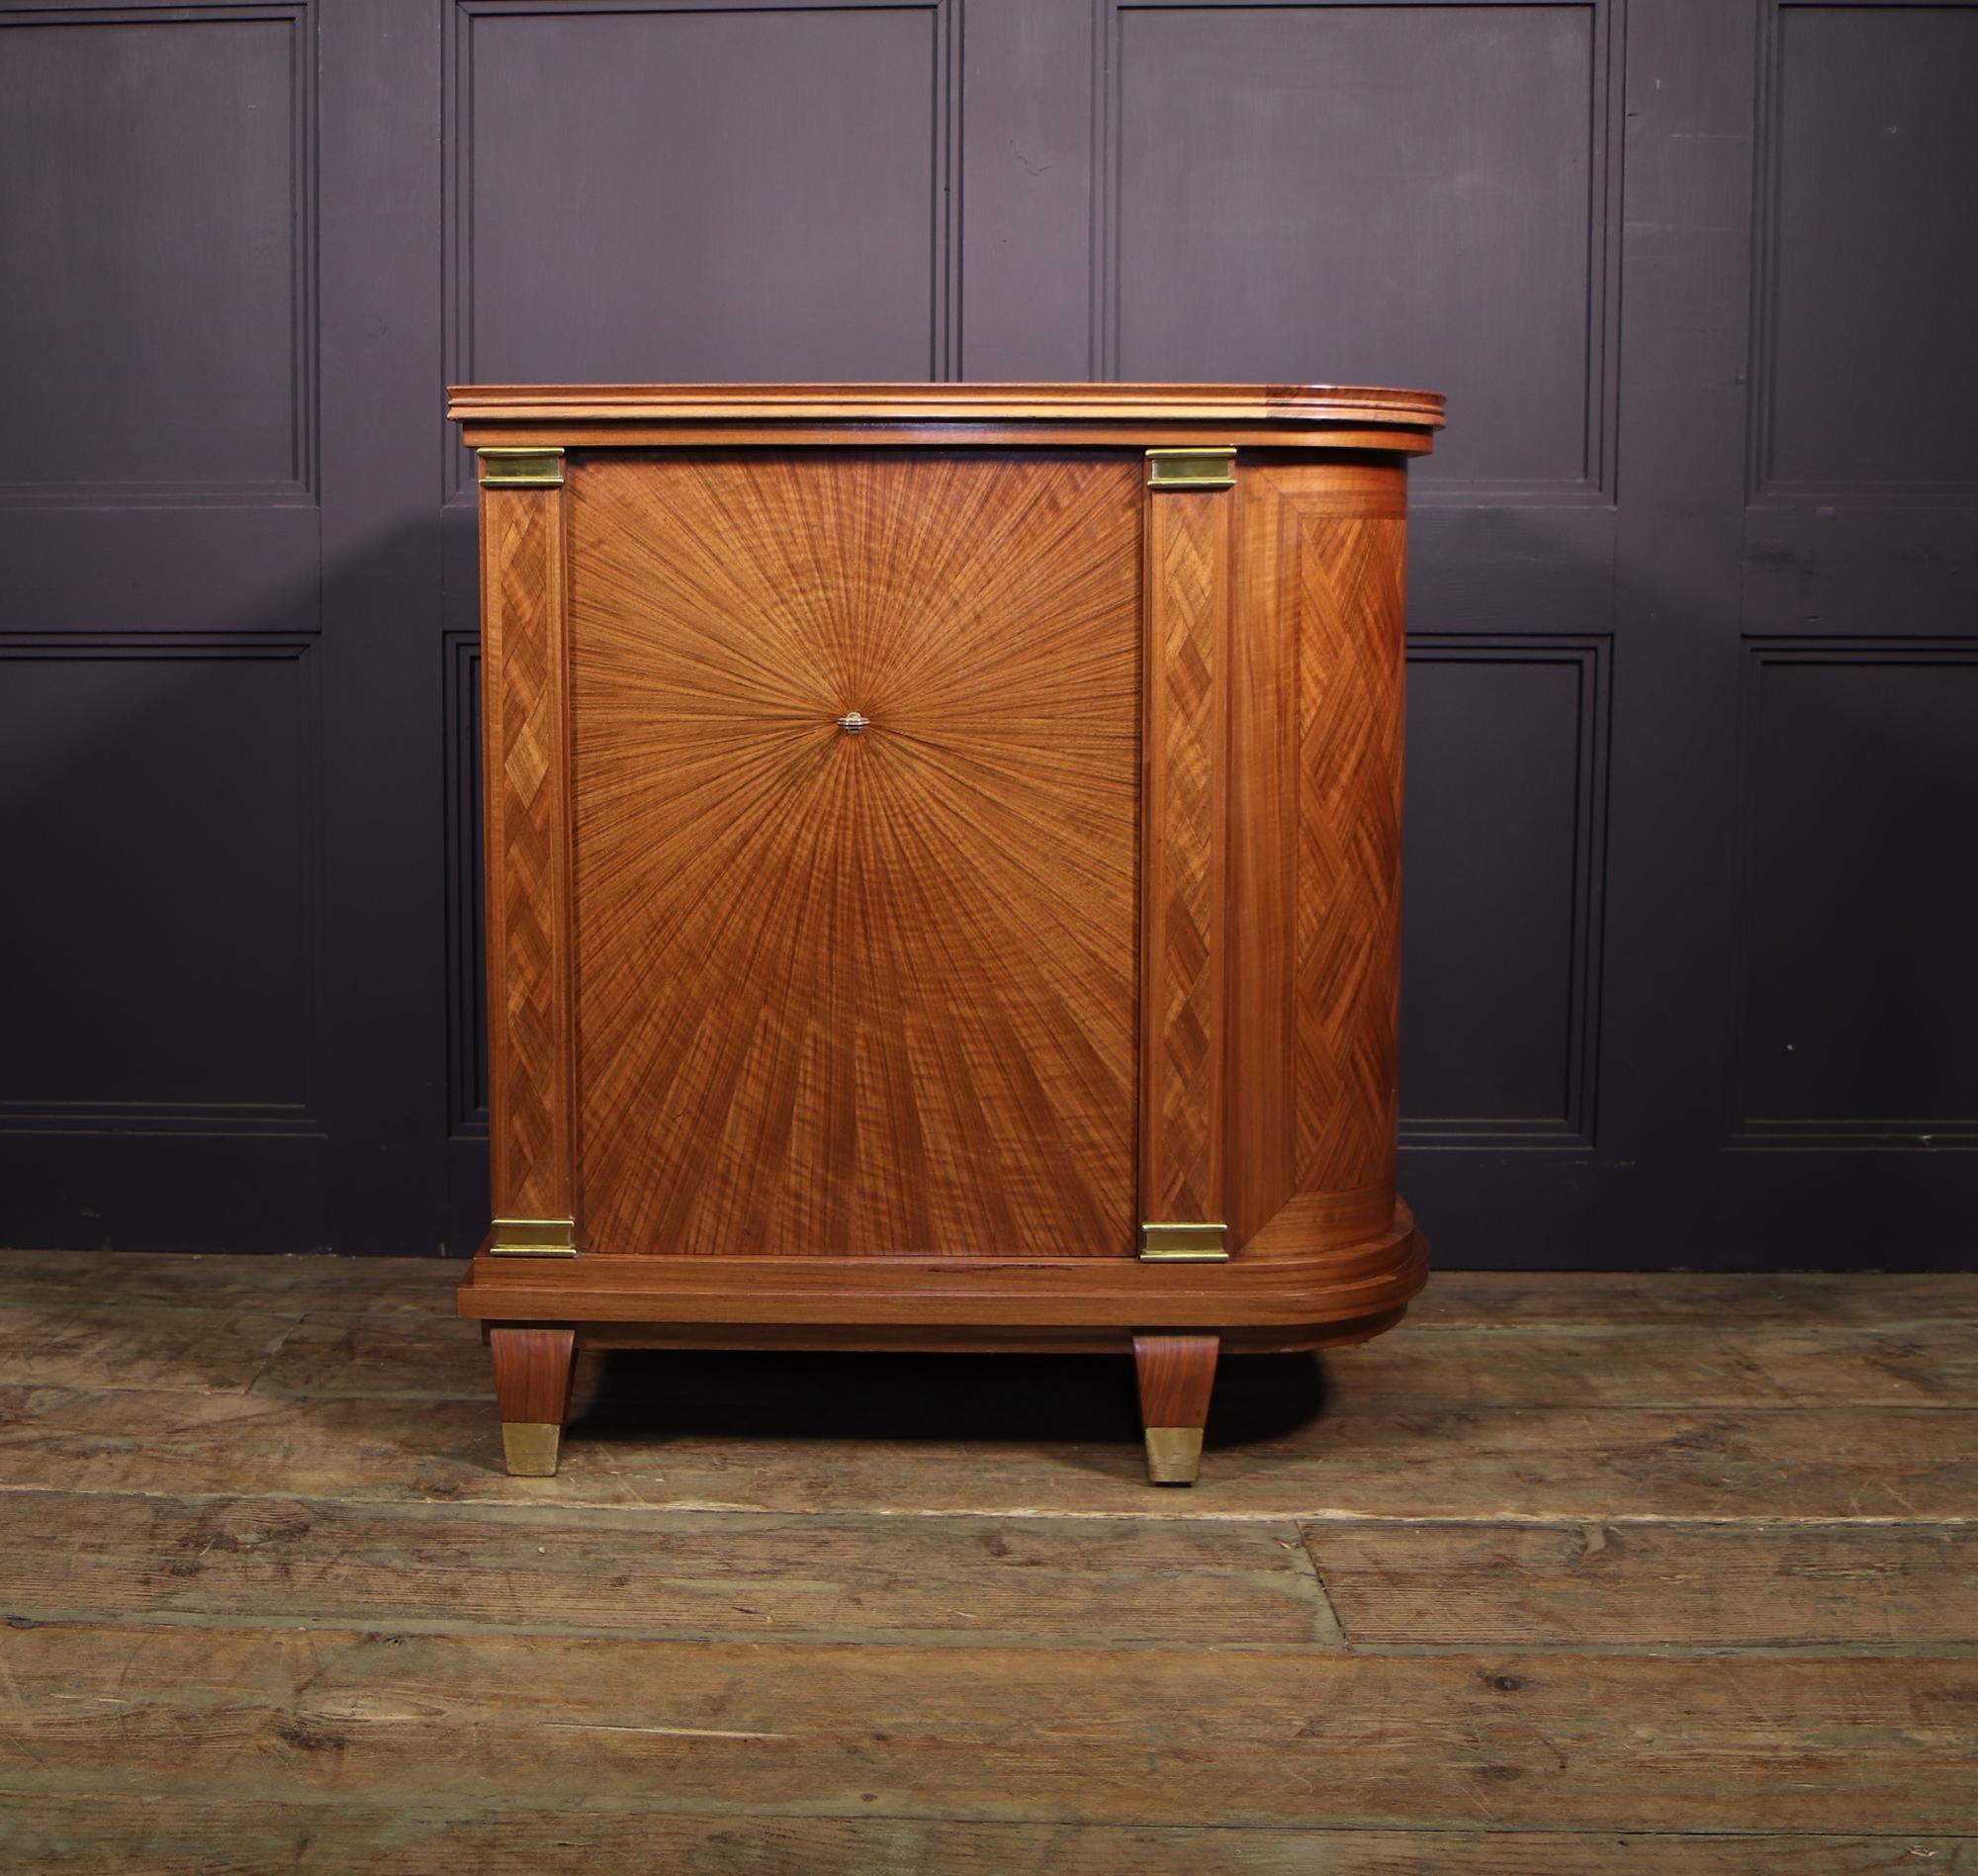 20th Century Art Deco Cocktail Cabinet Walnut Parquetry and Gilt Bronze Fittings